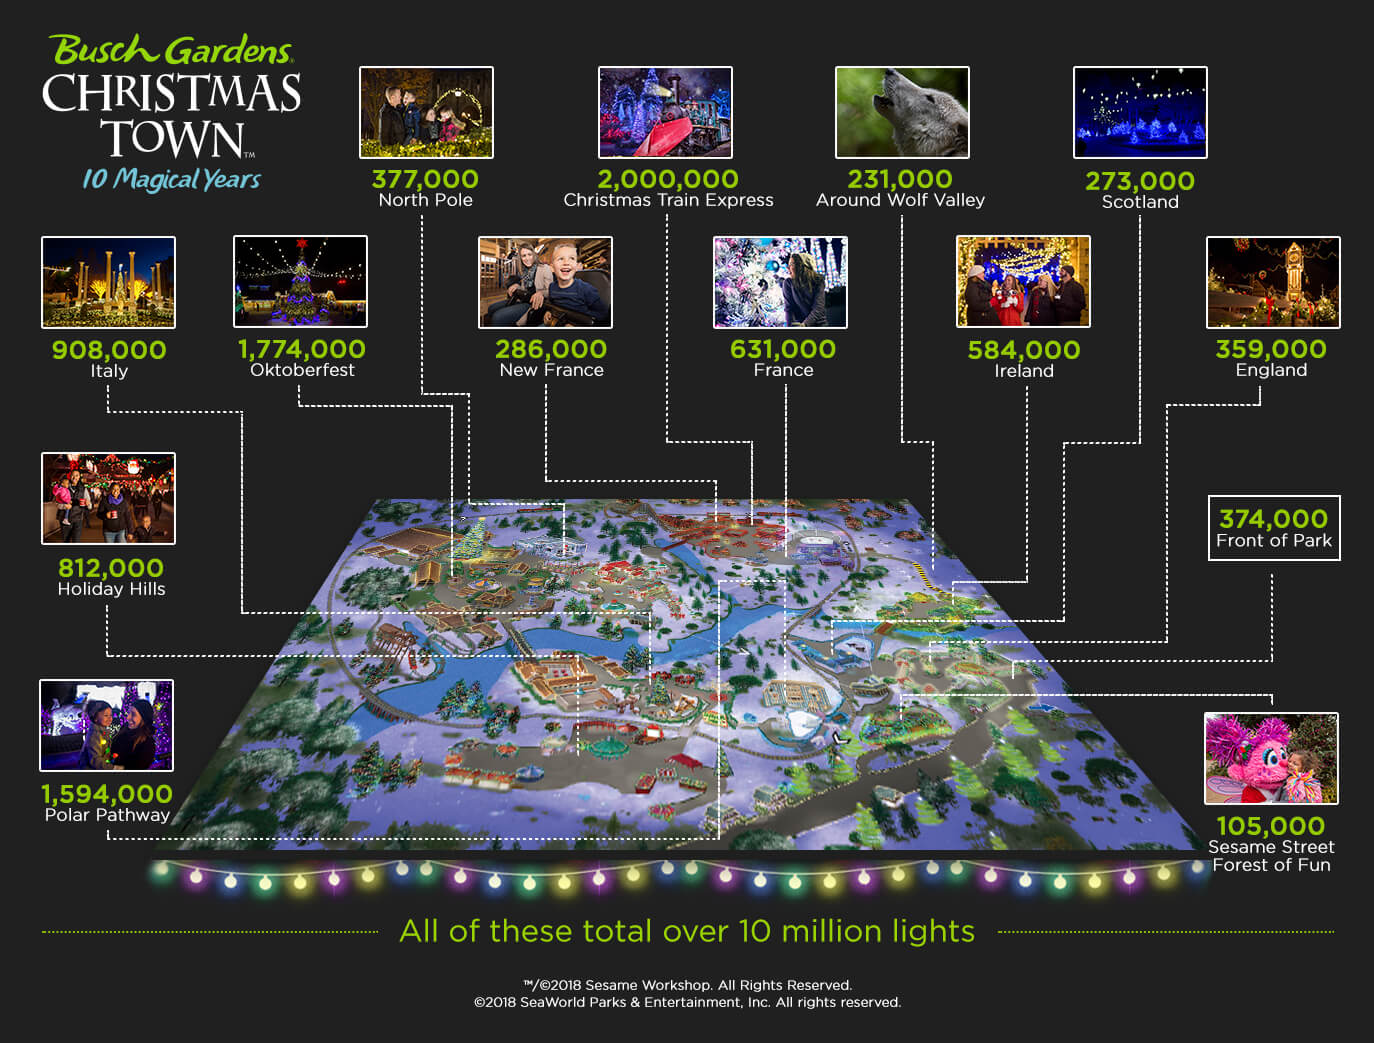 Where to see the lights at Christmas Town